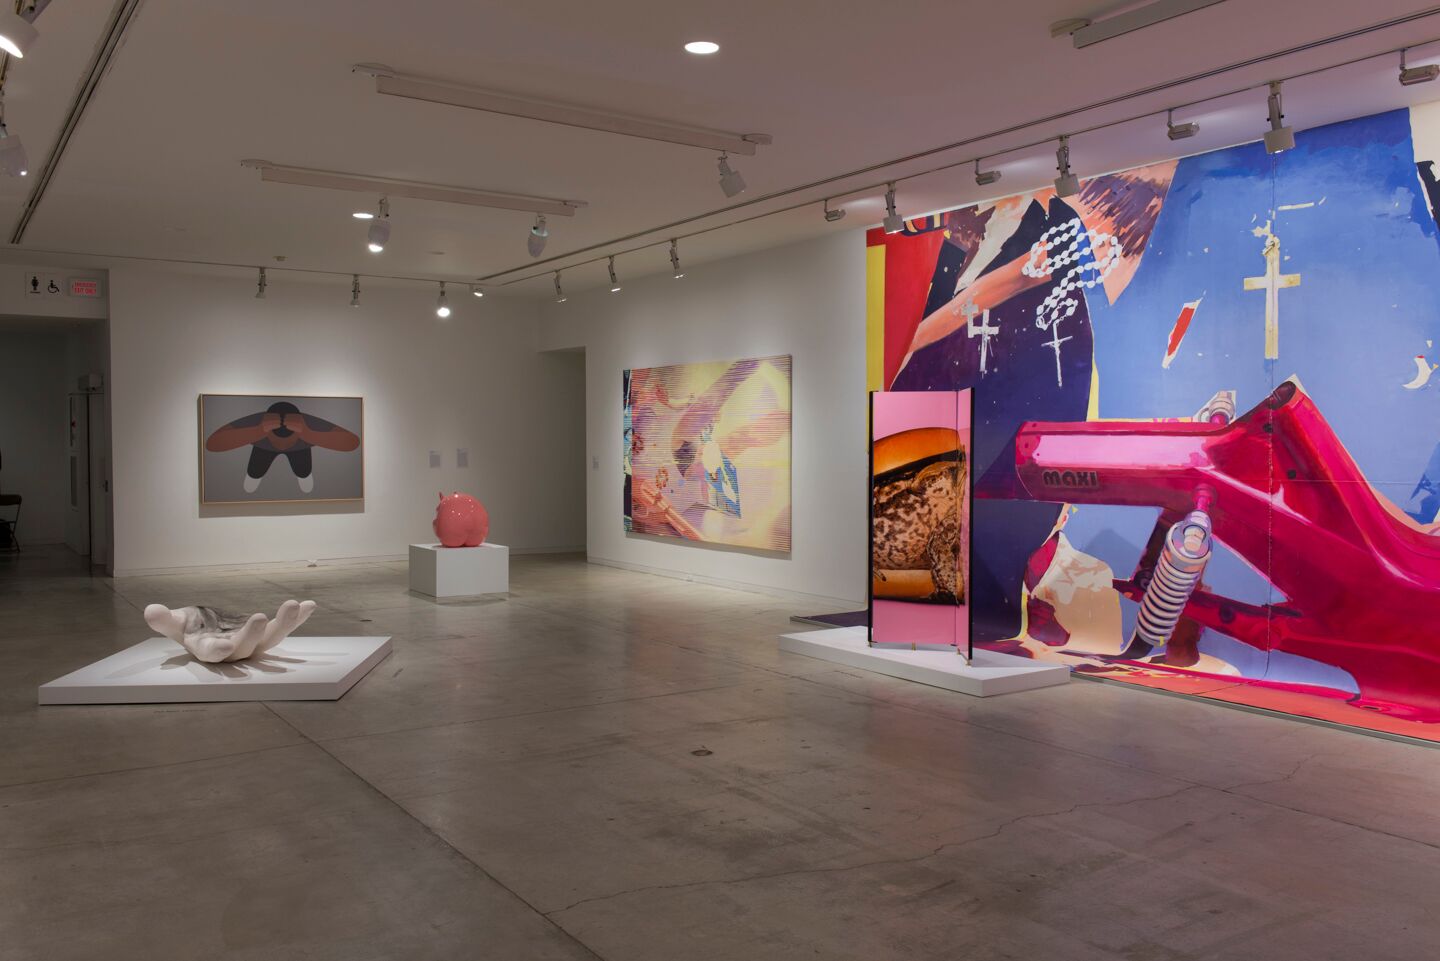 Installation view with Parra and McFetridge